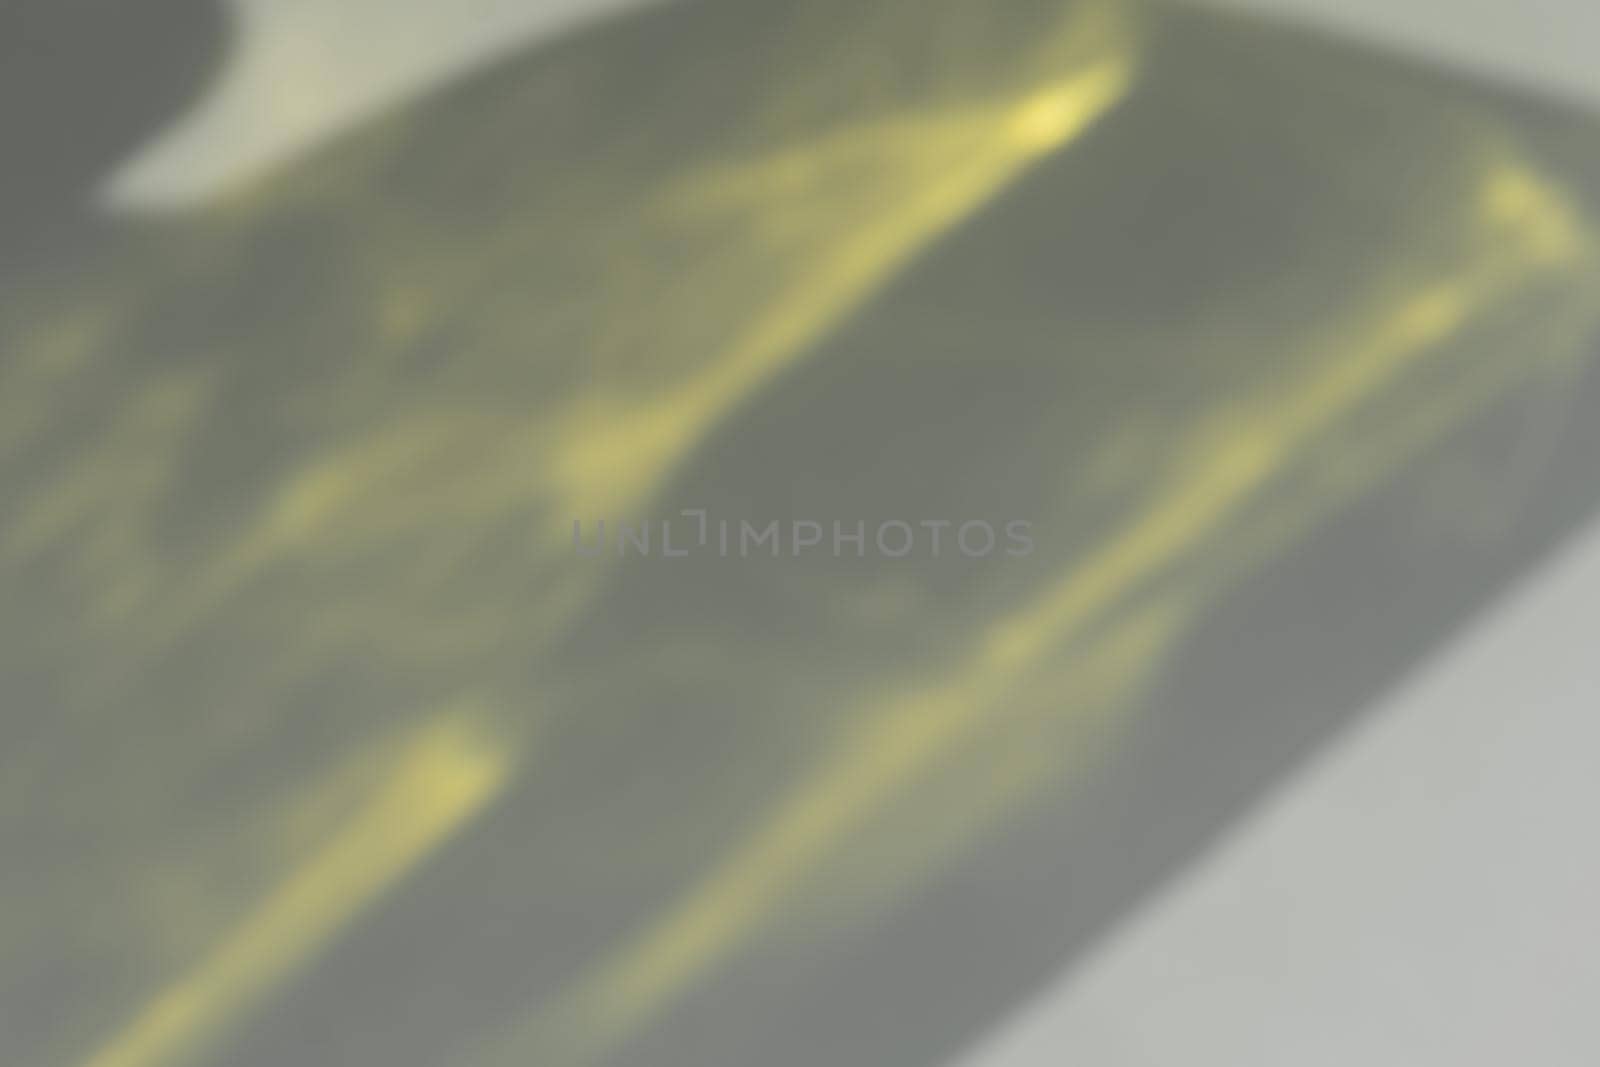 Caustic effect light refraction on yellow wall overlay , blurred sun rays refracting through glass prism with shadow. Abstract natural light refraction silhouette on water surface.